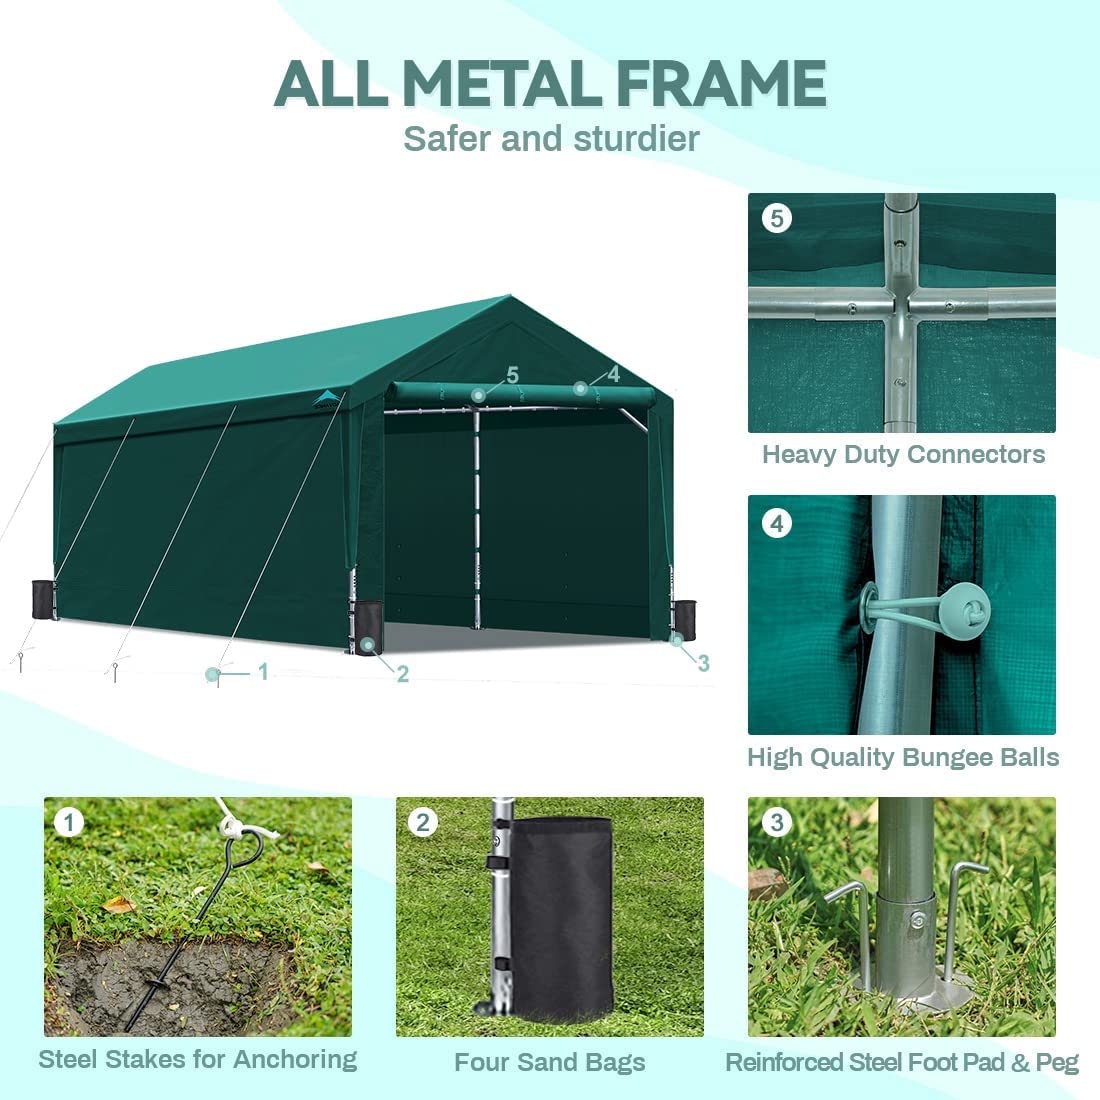 ADVANCE OUTDOOR 12x20 ft Heavy Duty Carport with Sidewalls and Doors, Adjustable Height from 9.5 ft to 11 ft, Car Canopy Garage Party Tent Boat Shelter with 8 Reinforced Poles and 4 Sandbags,Green Green 12'x20'